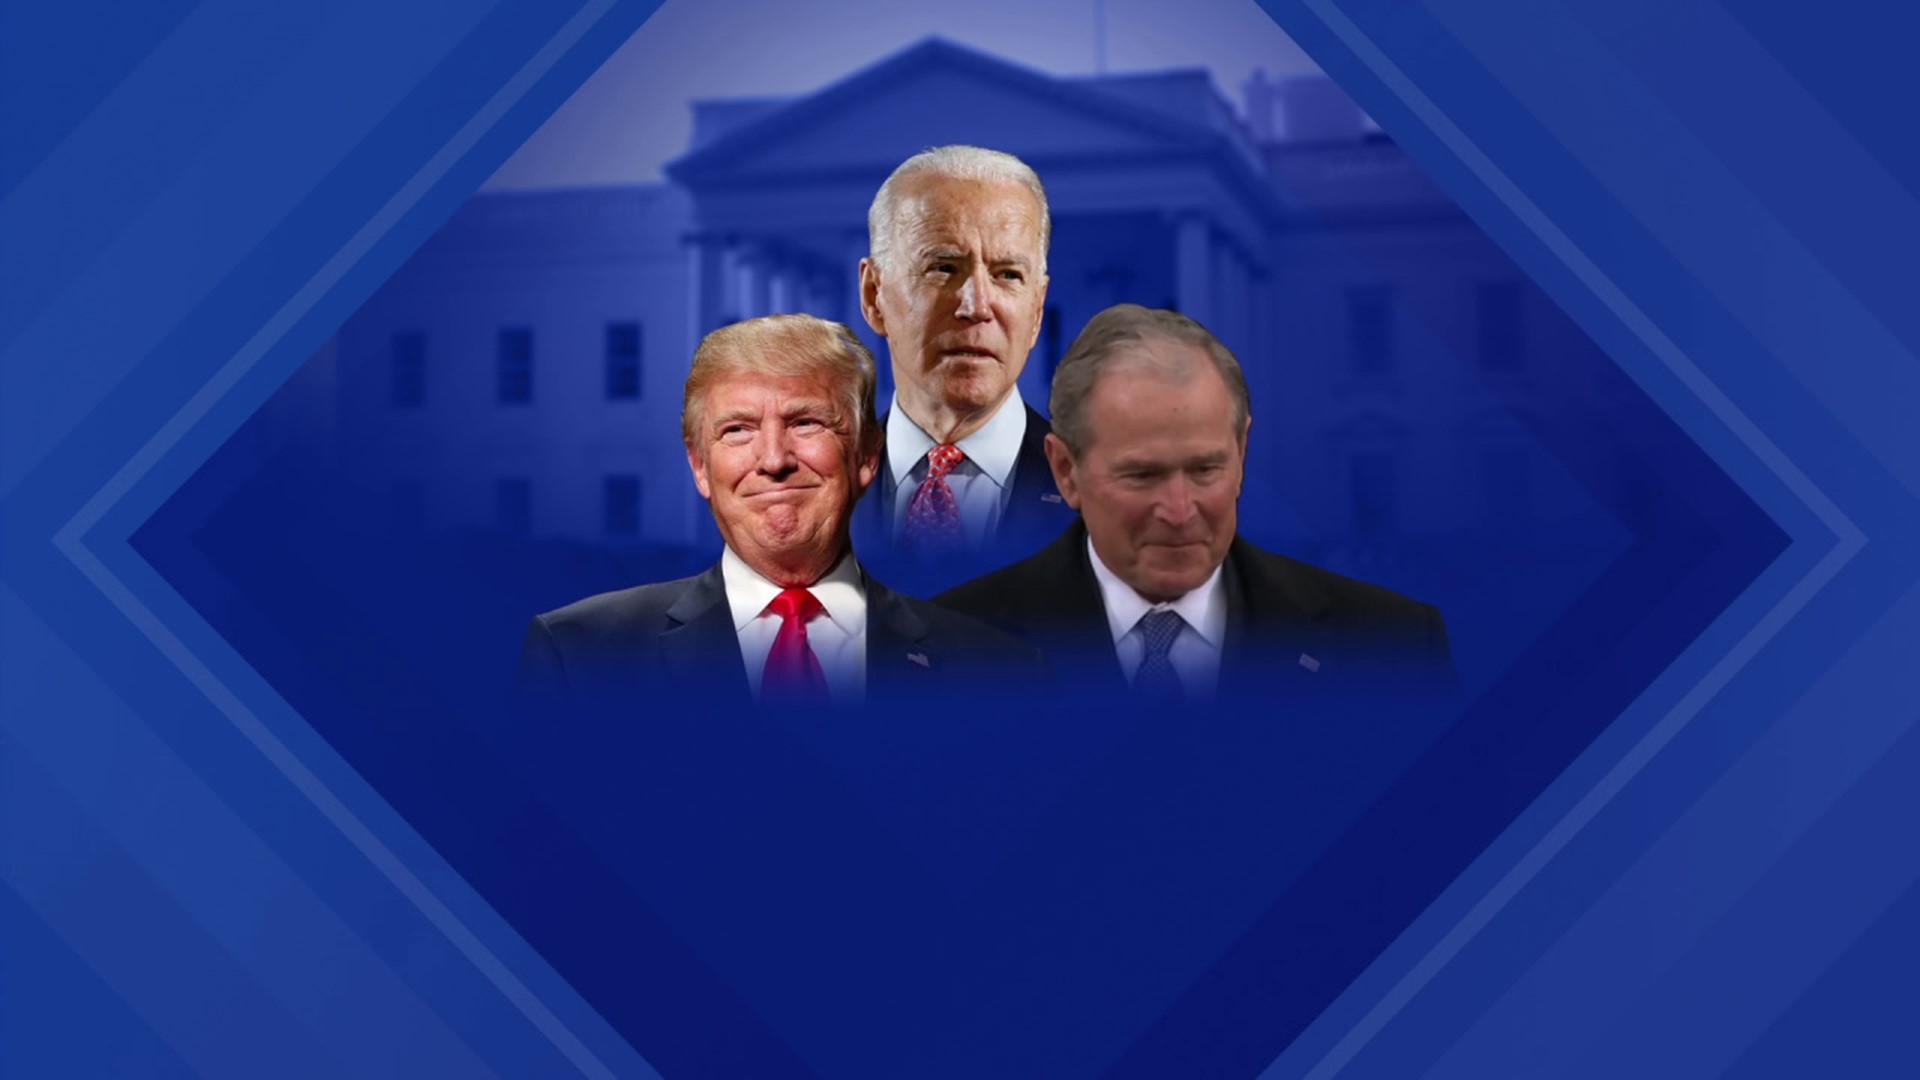 President Joe Biden, as well as former Presidents George W. Bush and Donald Trump, will all be making stops across our area in the coming weeks.